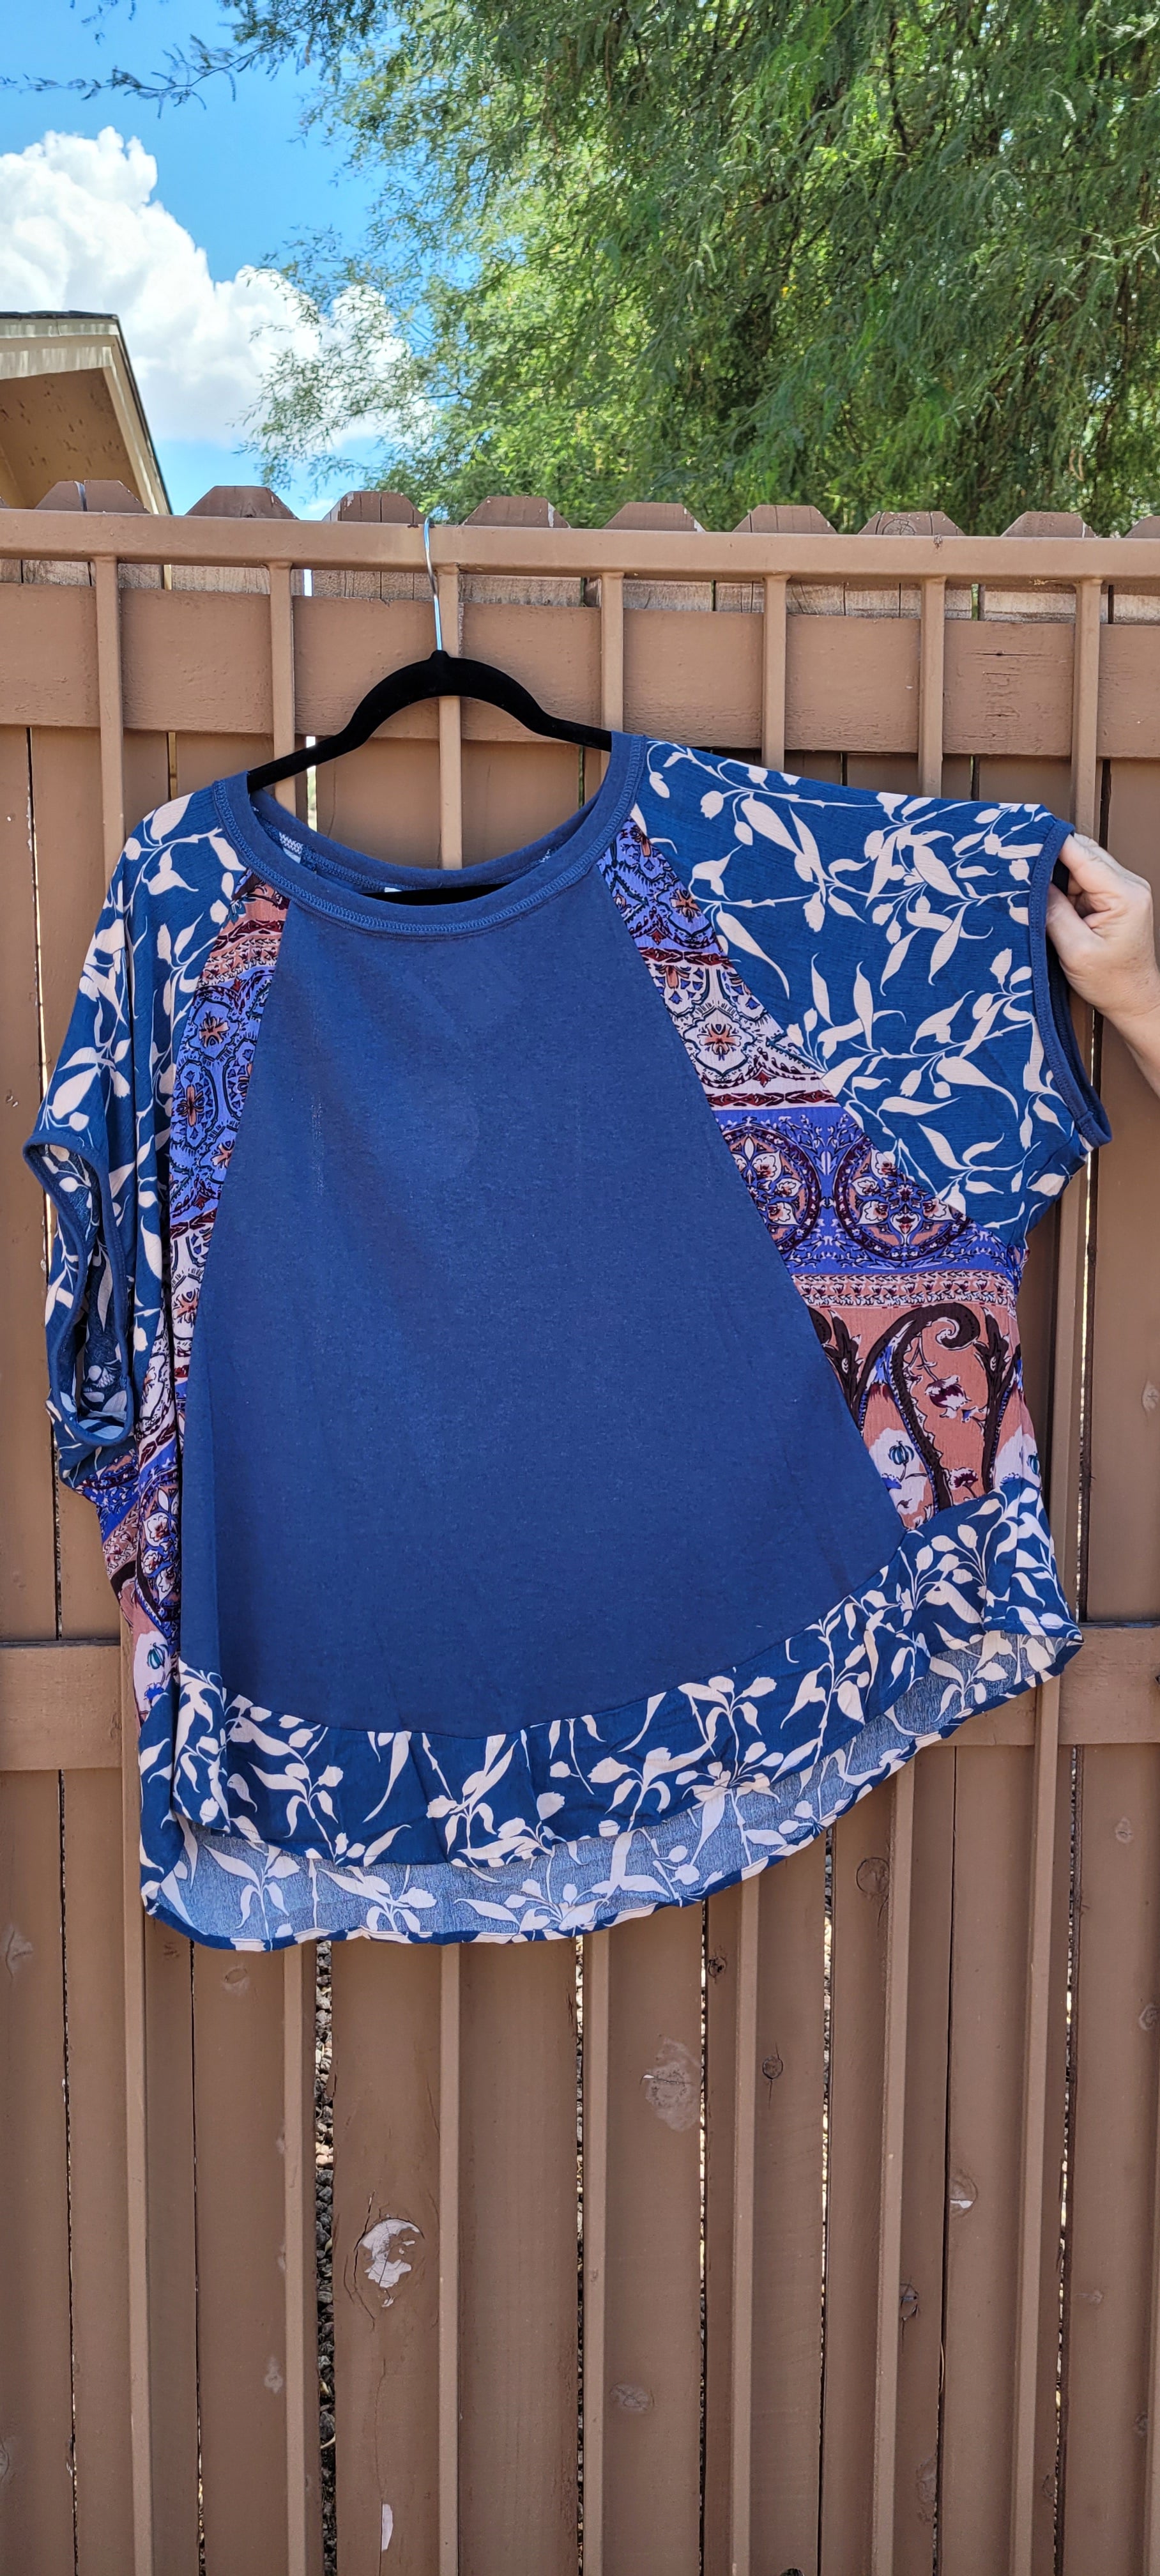 “I've Got The Blues” is a Egyptian blue blouse. This top features a scoop neckline, dolman sleeves, high low rounded hemline, trimmed with floral print on hemline and sleeves, layered floral pattern on back. This is a loose fitting top. It is perfect for the office setting. Size 2X-Large.